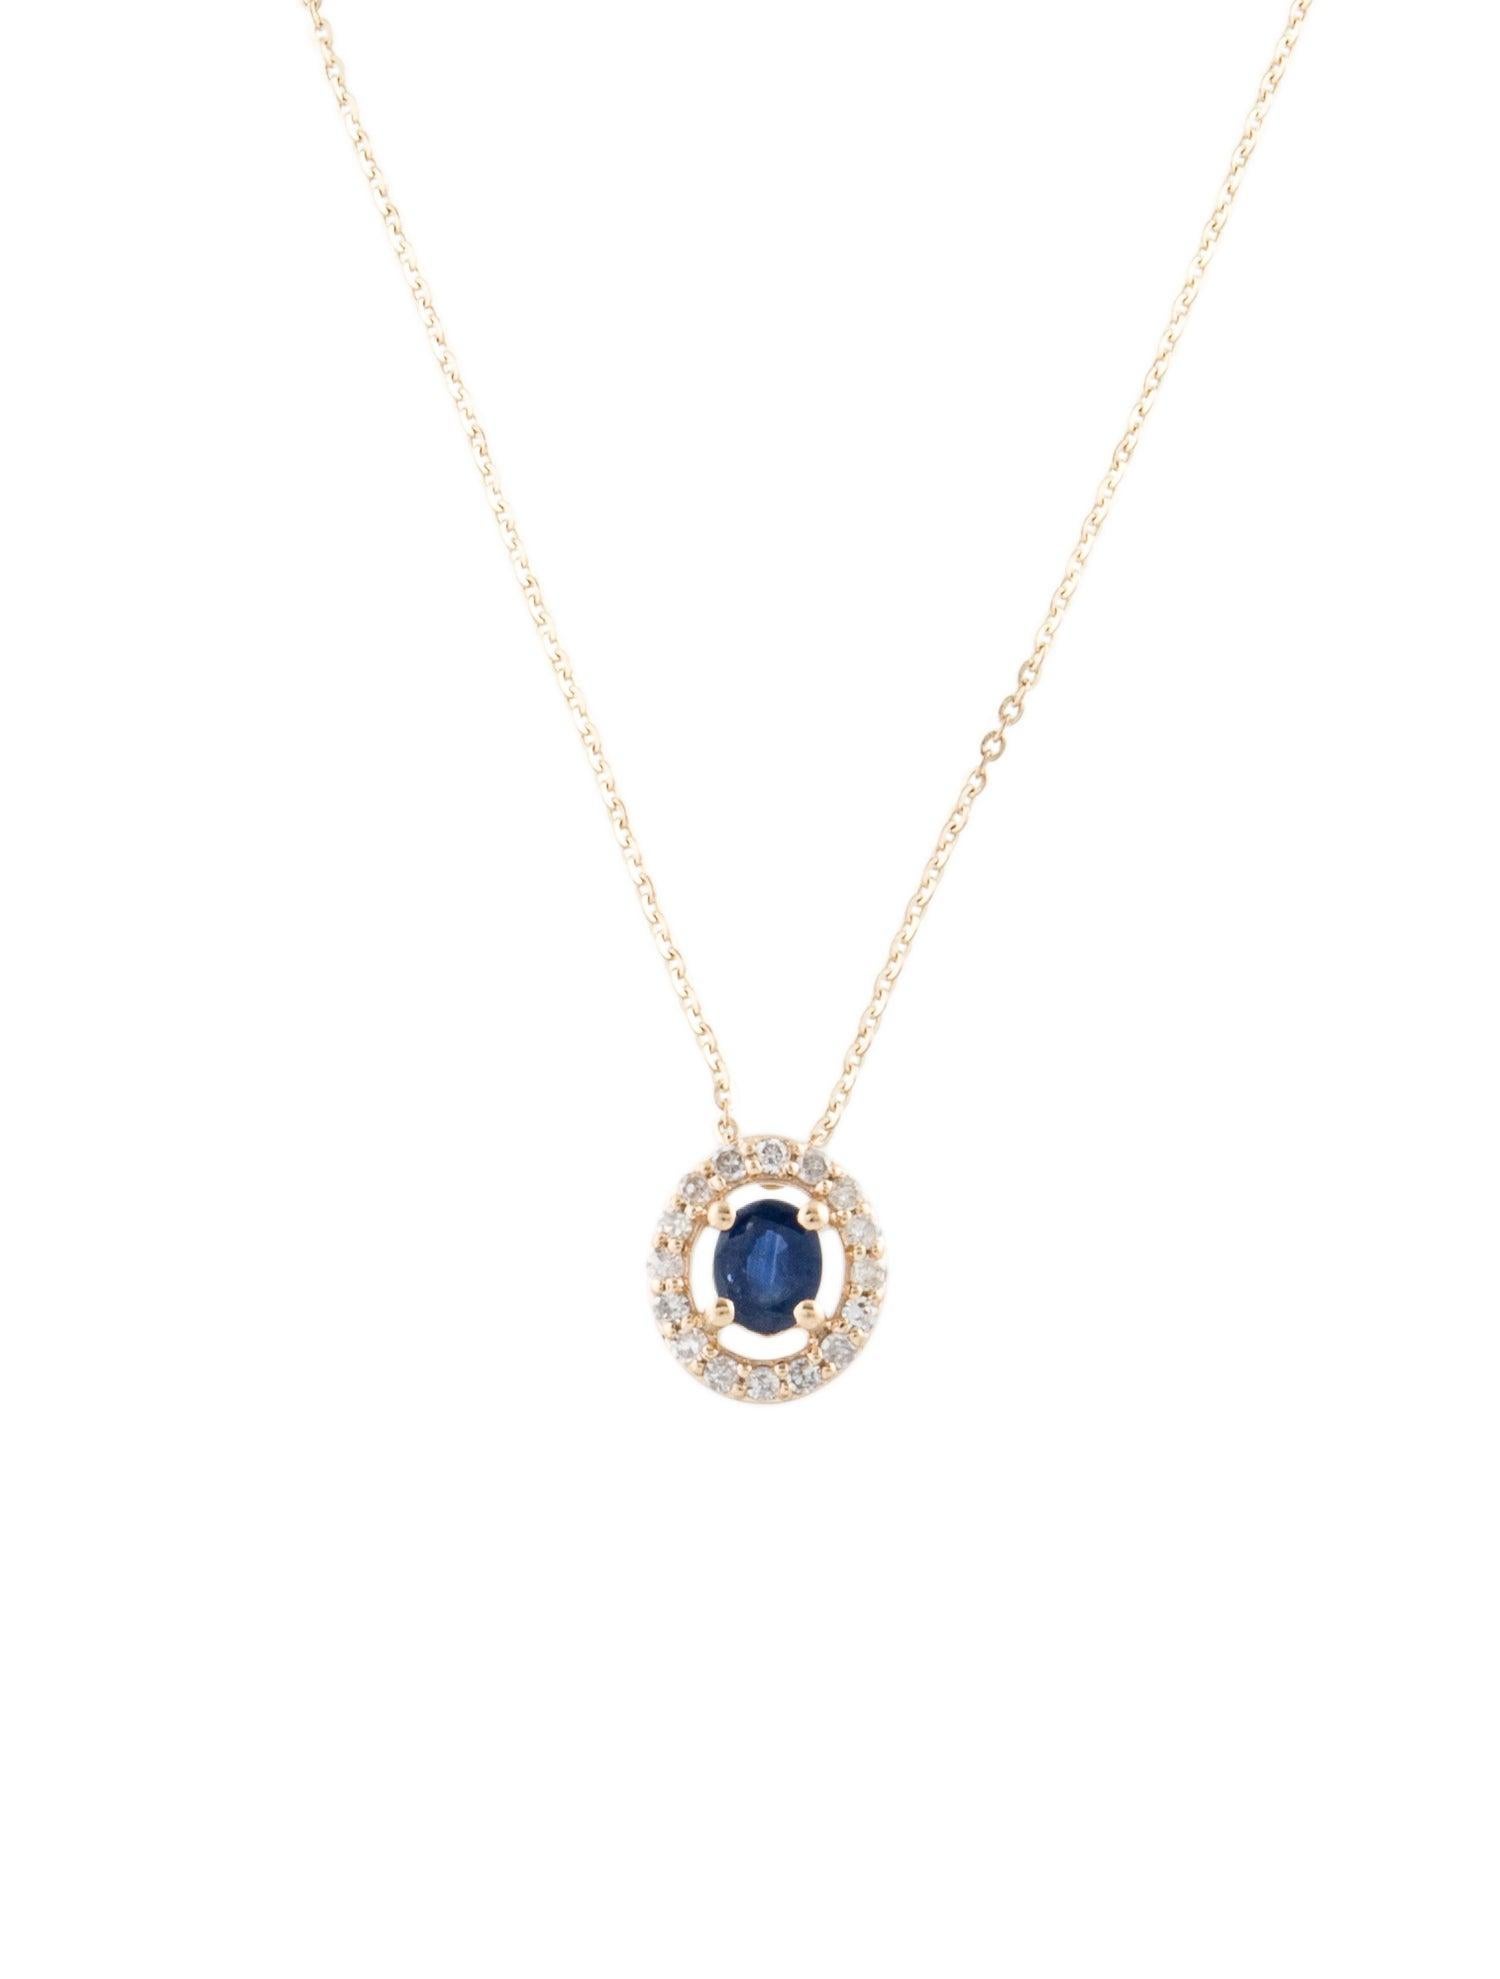 Elegant 14K Sapphire & Diamond Halo Pendant Necklace - Gemstone Sparkle Accent In New Condition For Sale In Holtsville, NY